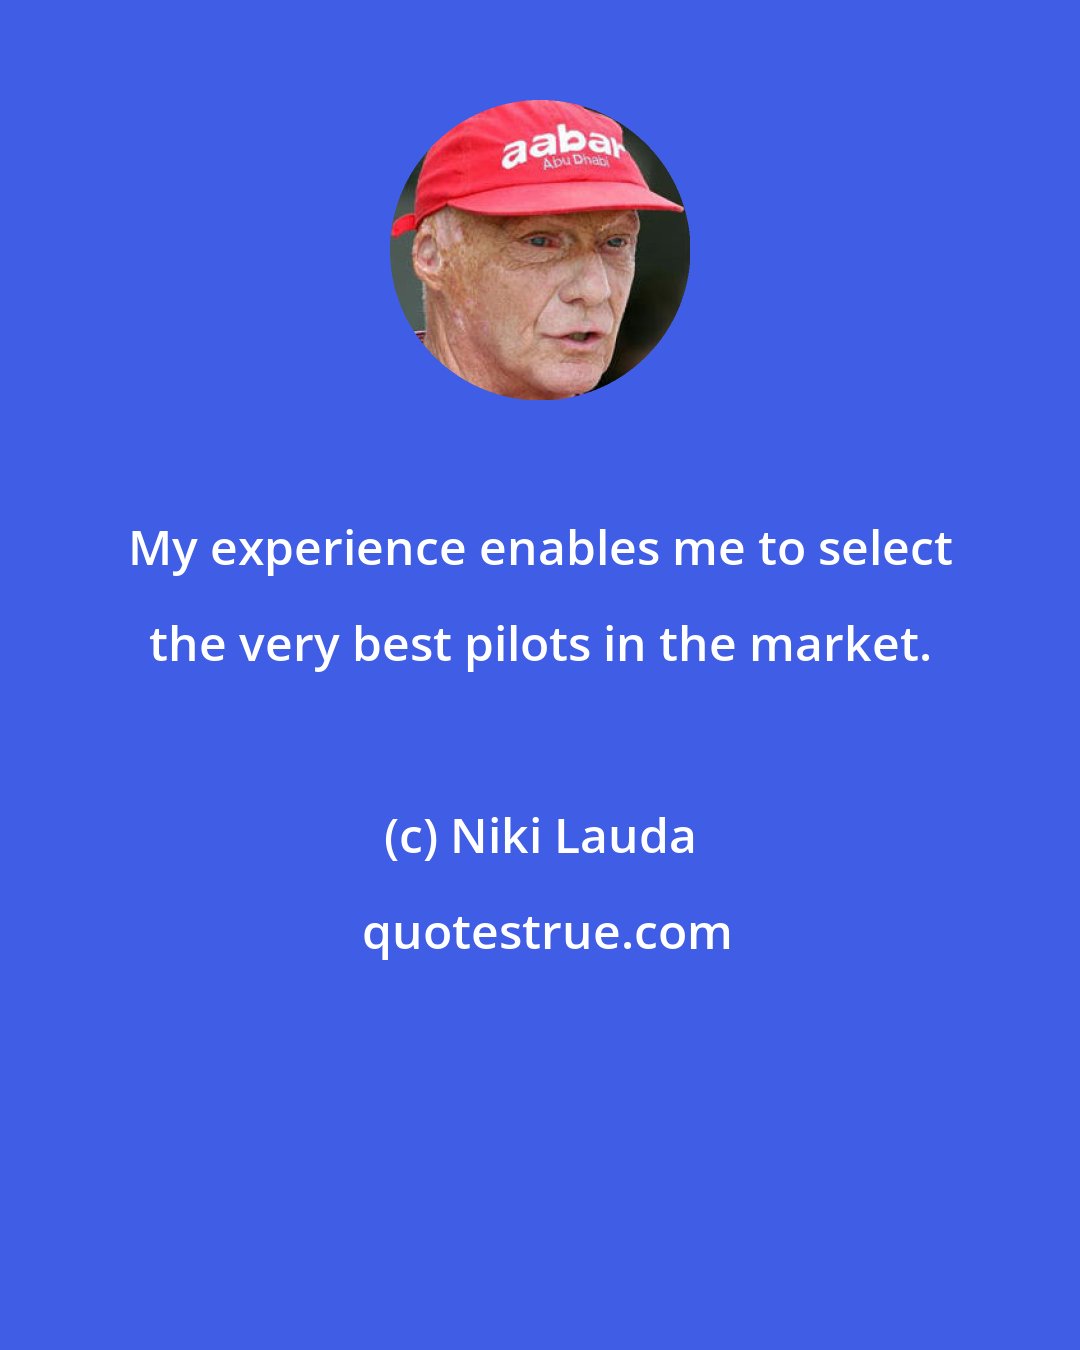 Niki Lauda: My experience enables me to select the very best pilots in the market.